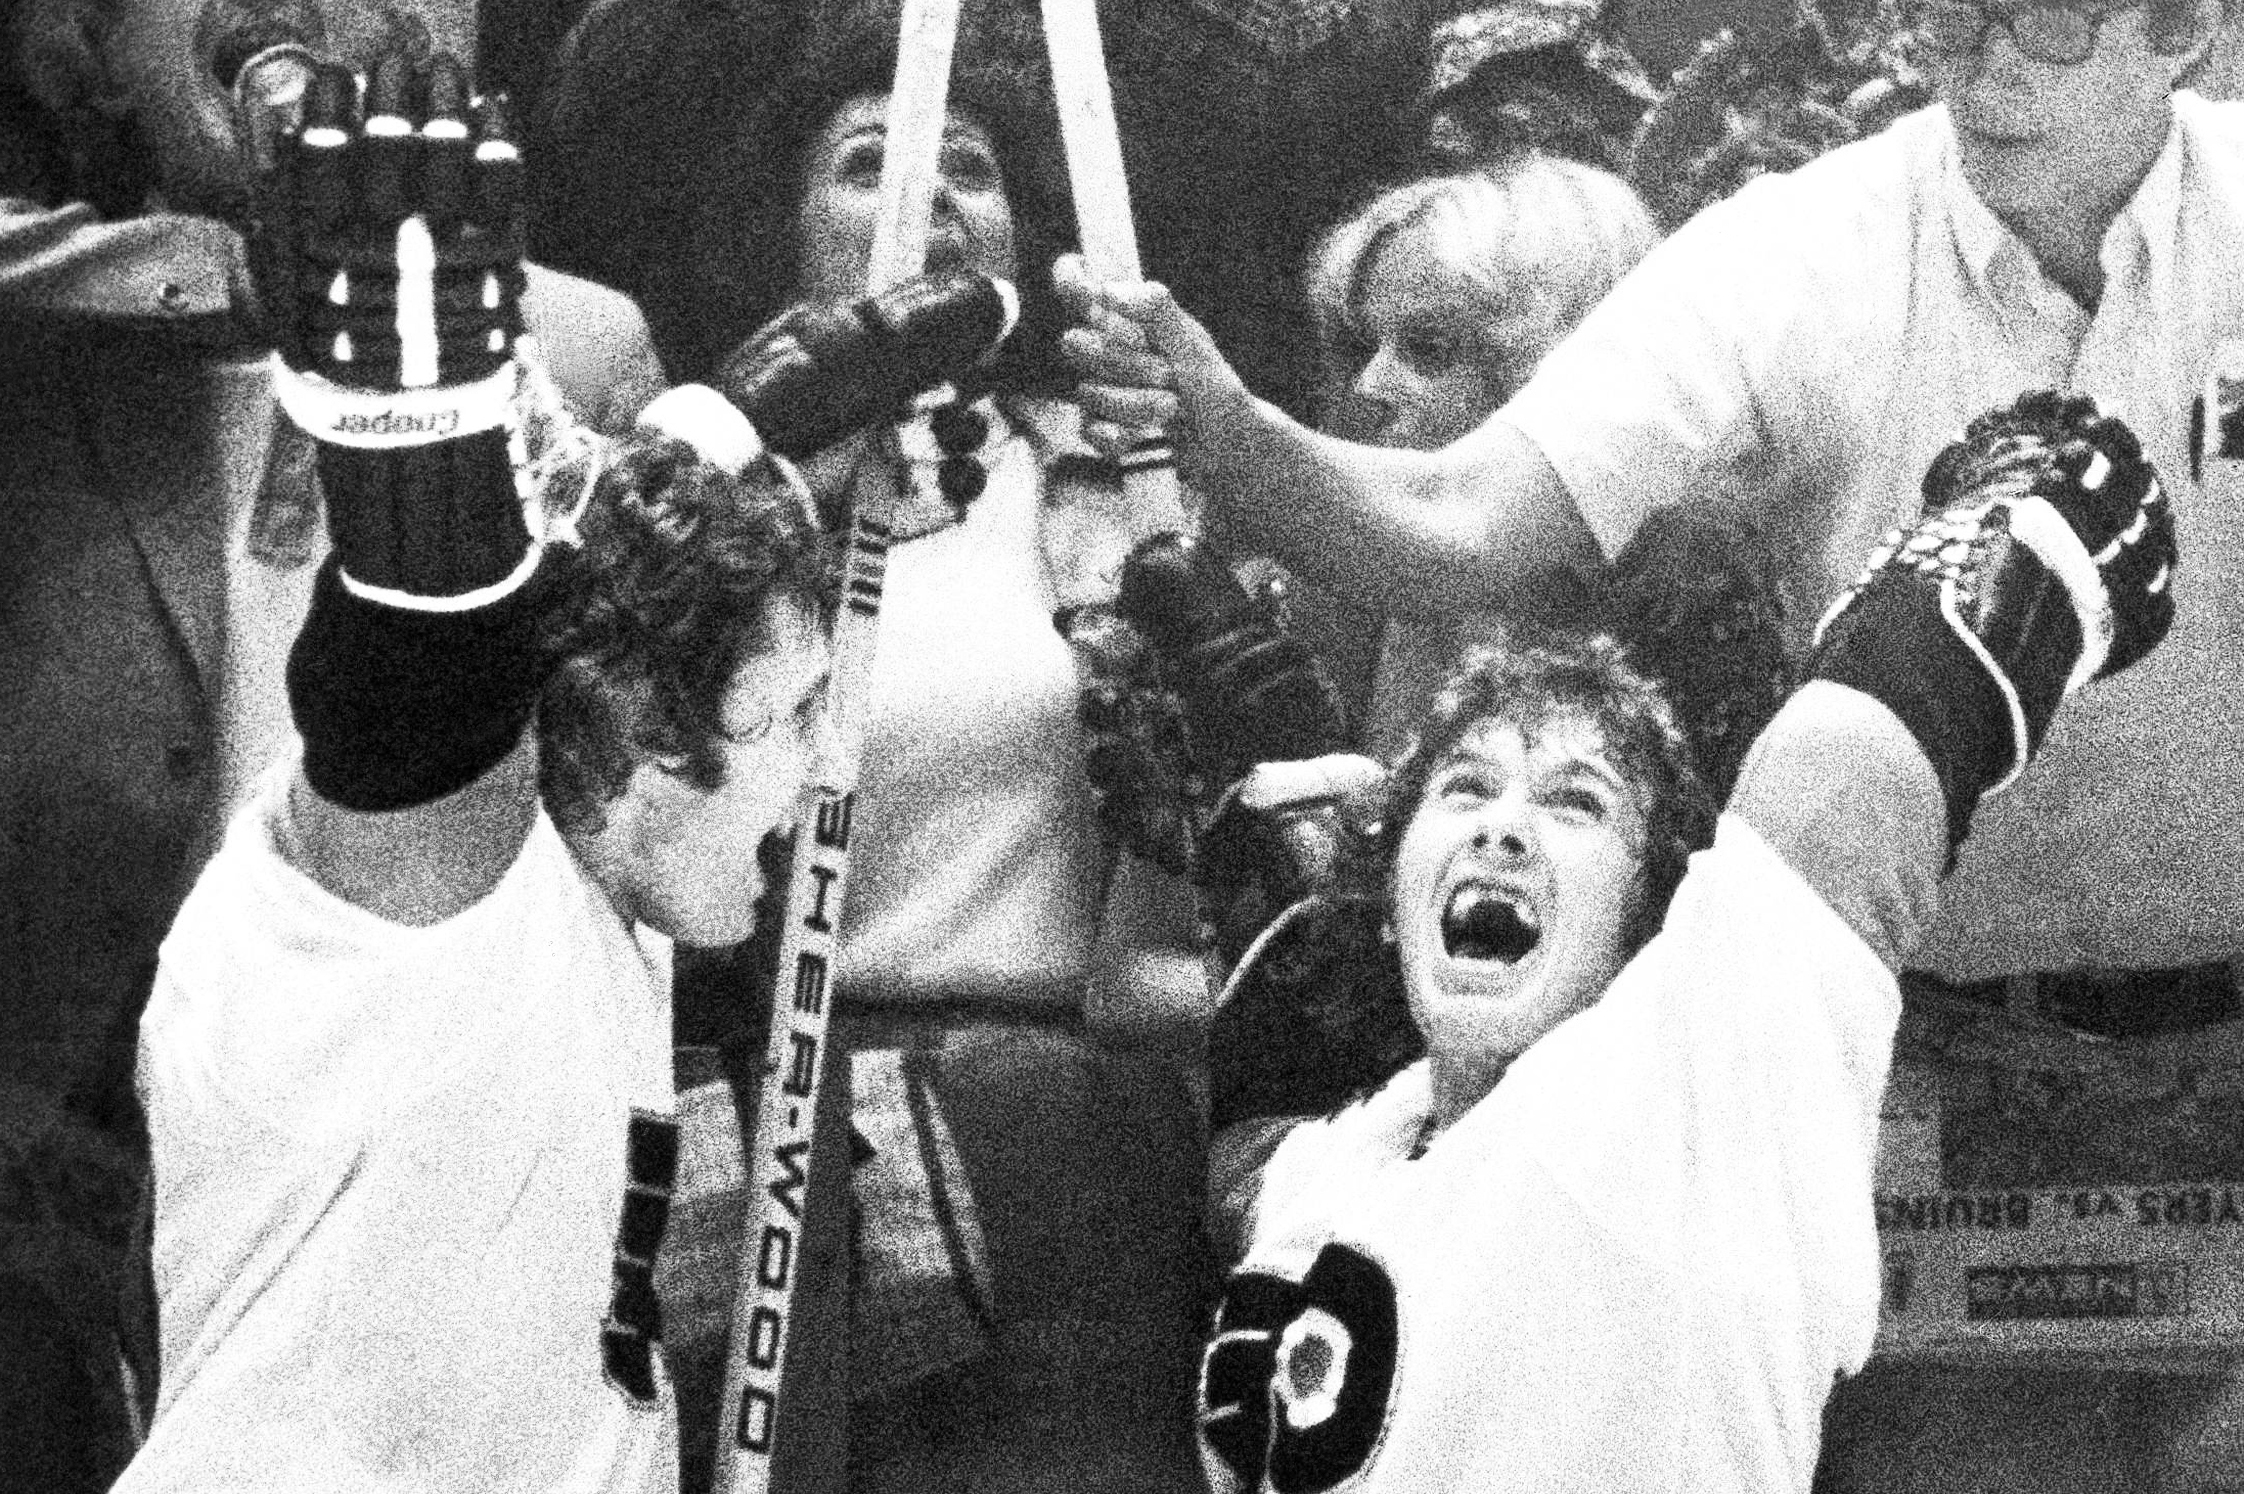 WHERE ARE THEY NOW? What Happened to the Bruins Who Won the Stanley Cup 40  Years Ago?